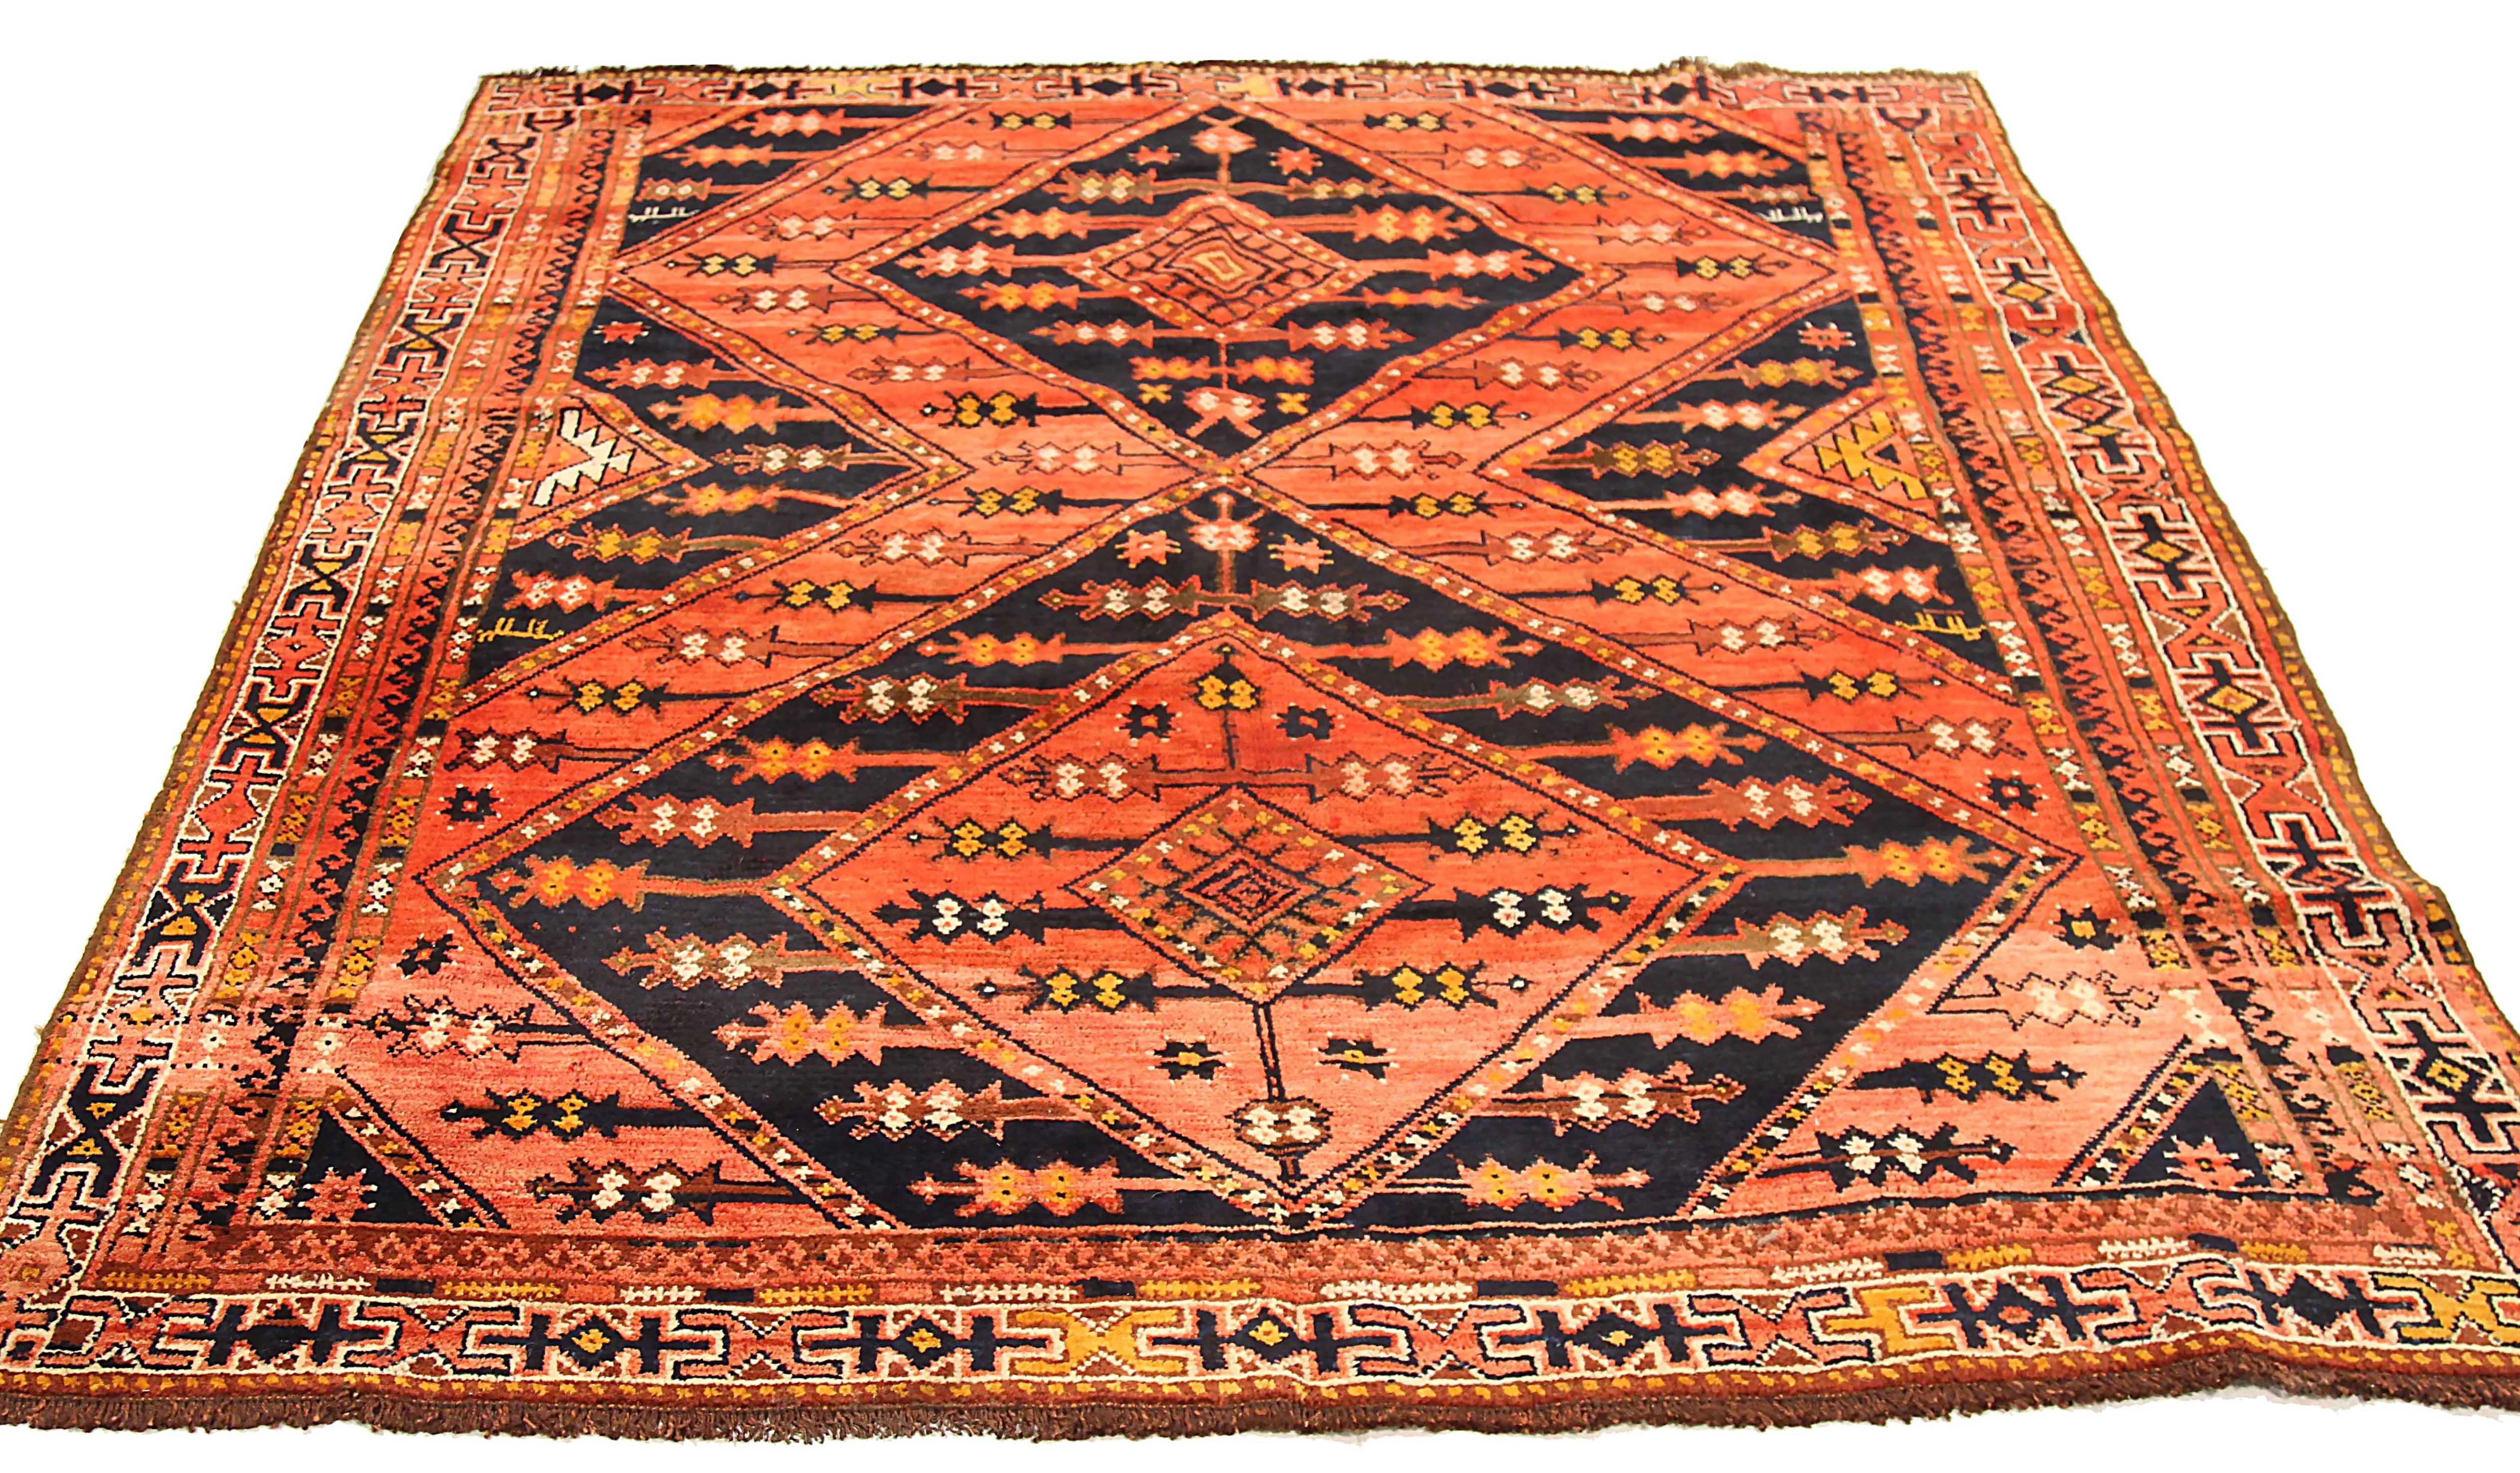 Antique Russian area rug handwoven from the finest sheep’s wool. It’s colored with all-natural vegetable dyes that are safe for humans and pets. It’s a traditional Uzbak design handwoven by expert artisans. It’s a lovely area rug that can be